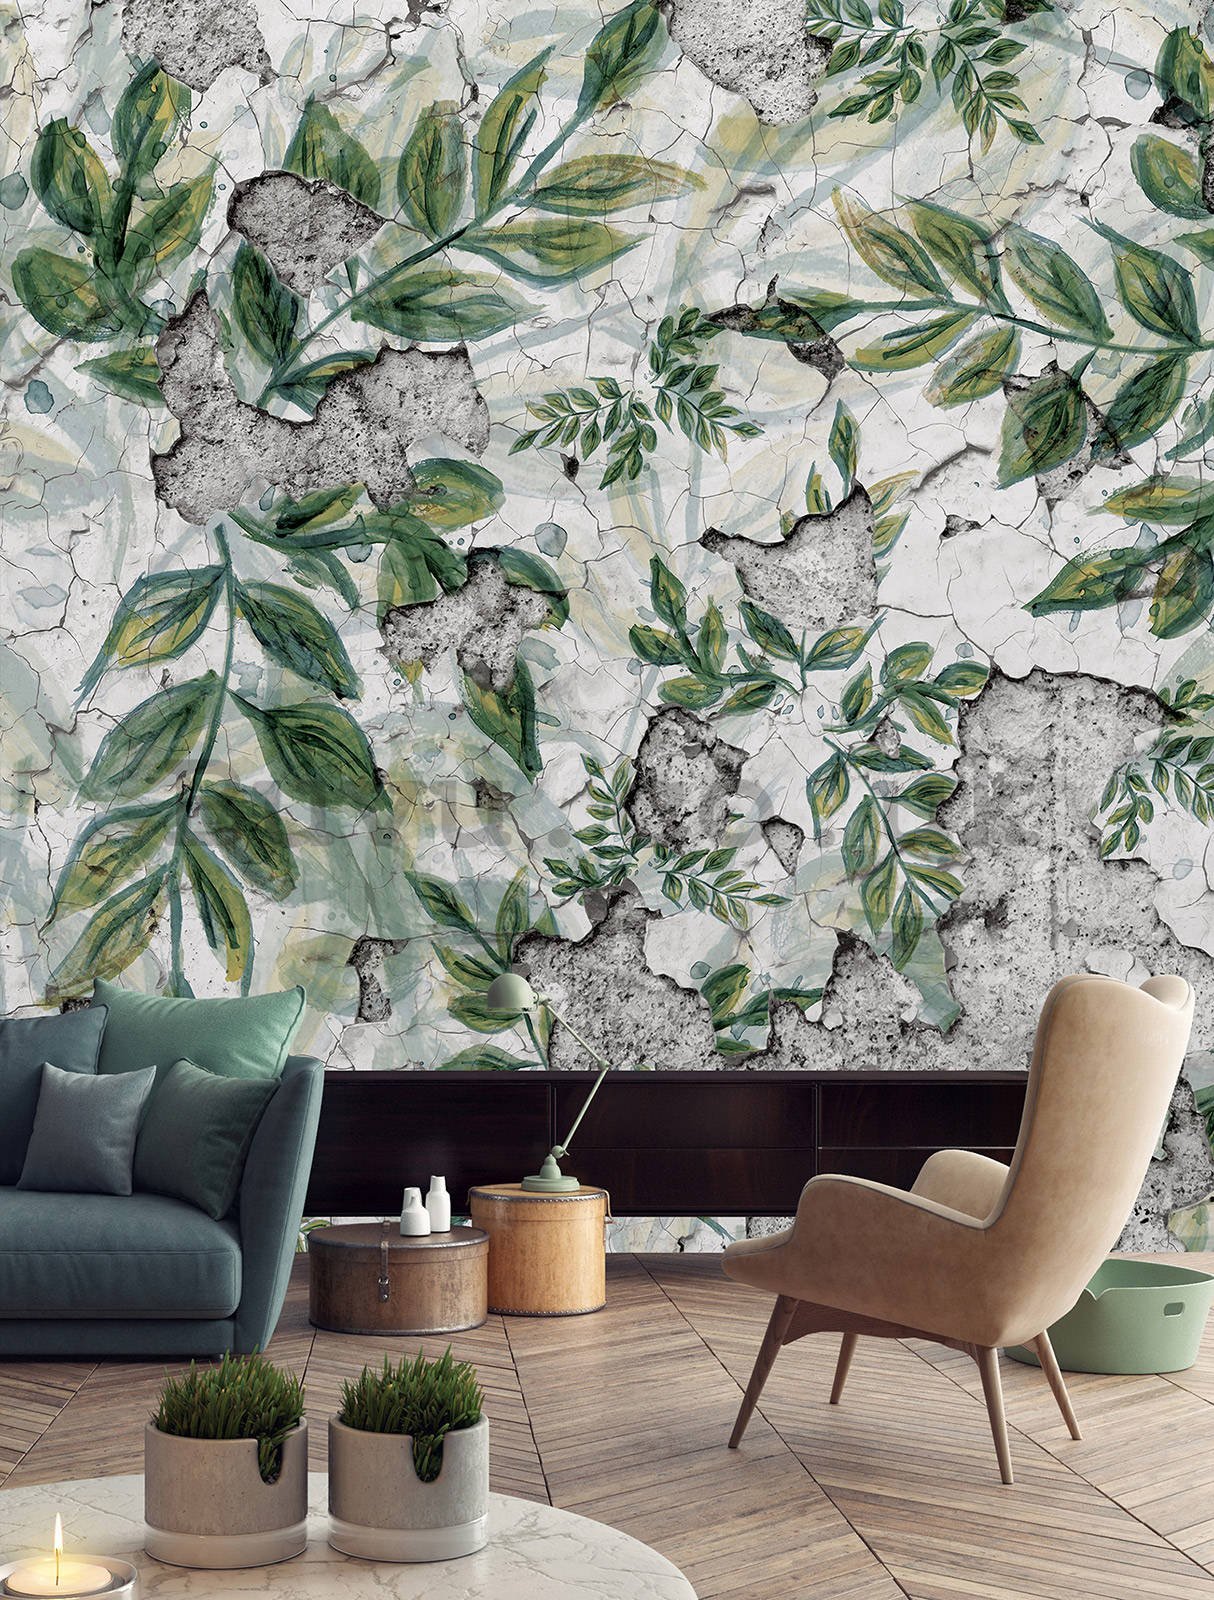 Wall mural vlies: Green leaves on cracked plaster - 254x184 cm